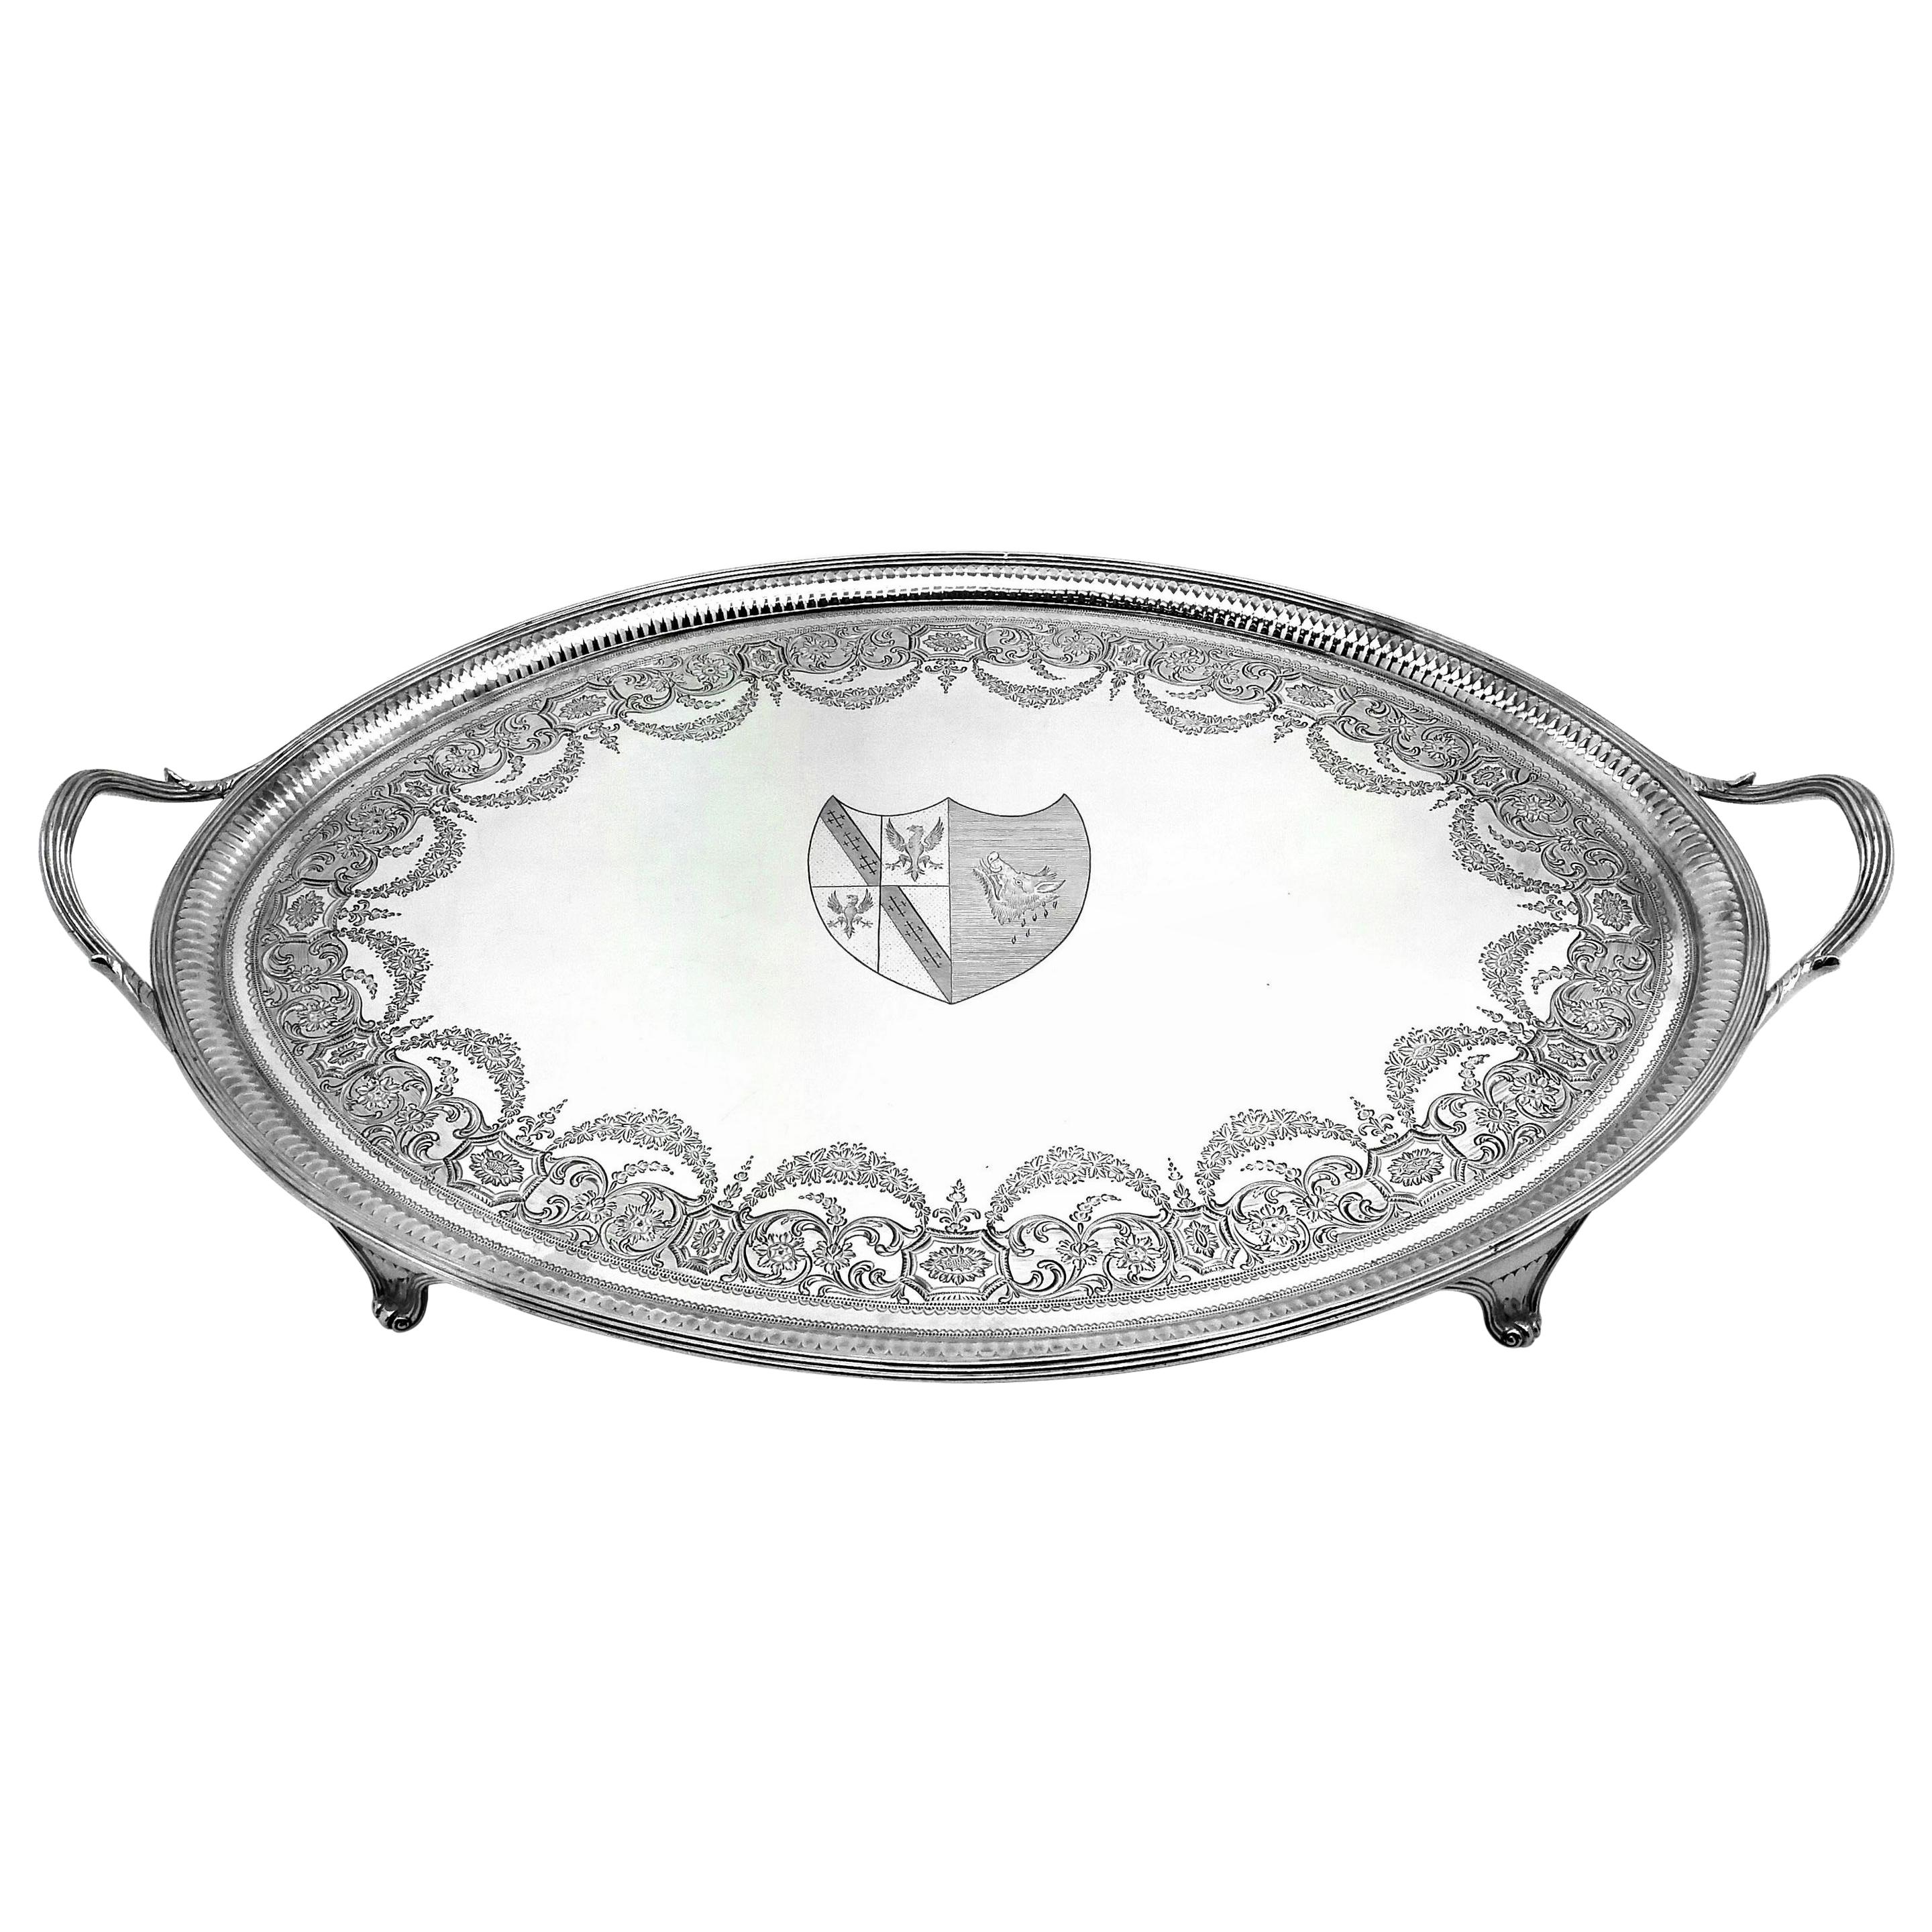 Antique Georgian George III Sterling Silver Tea Tray / Oval Serving Tray, 1788